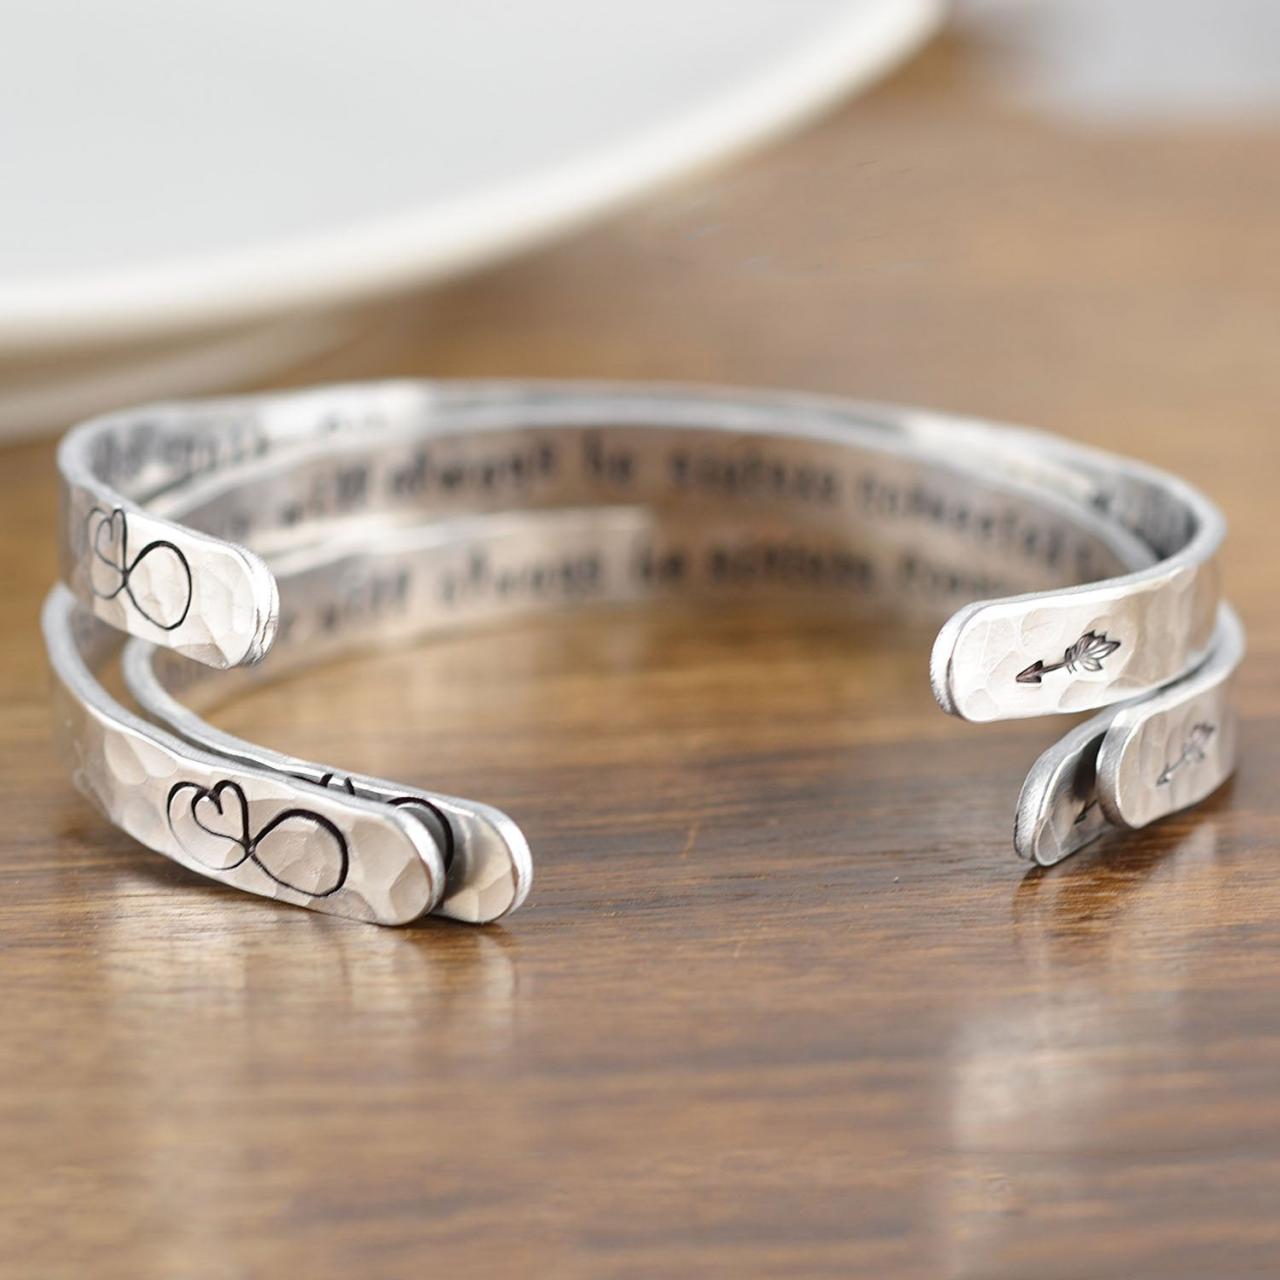 Cuff Bracelet, Sisters Bracelet, Sisters Jewelry, Sisters Distance Gift, Sisters Side By Side, Sisters Connected By Heart, Sisters Cuff